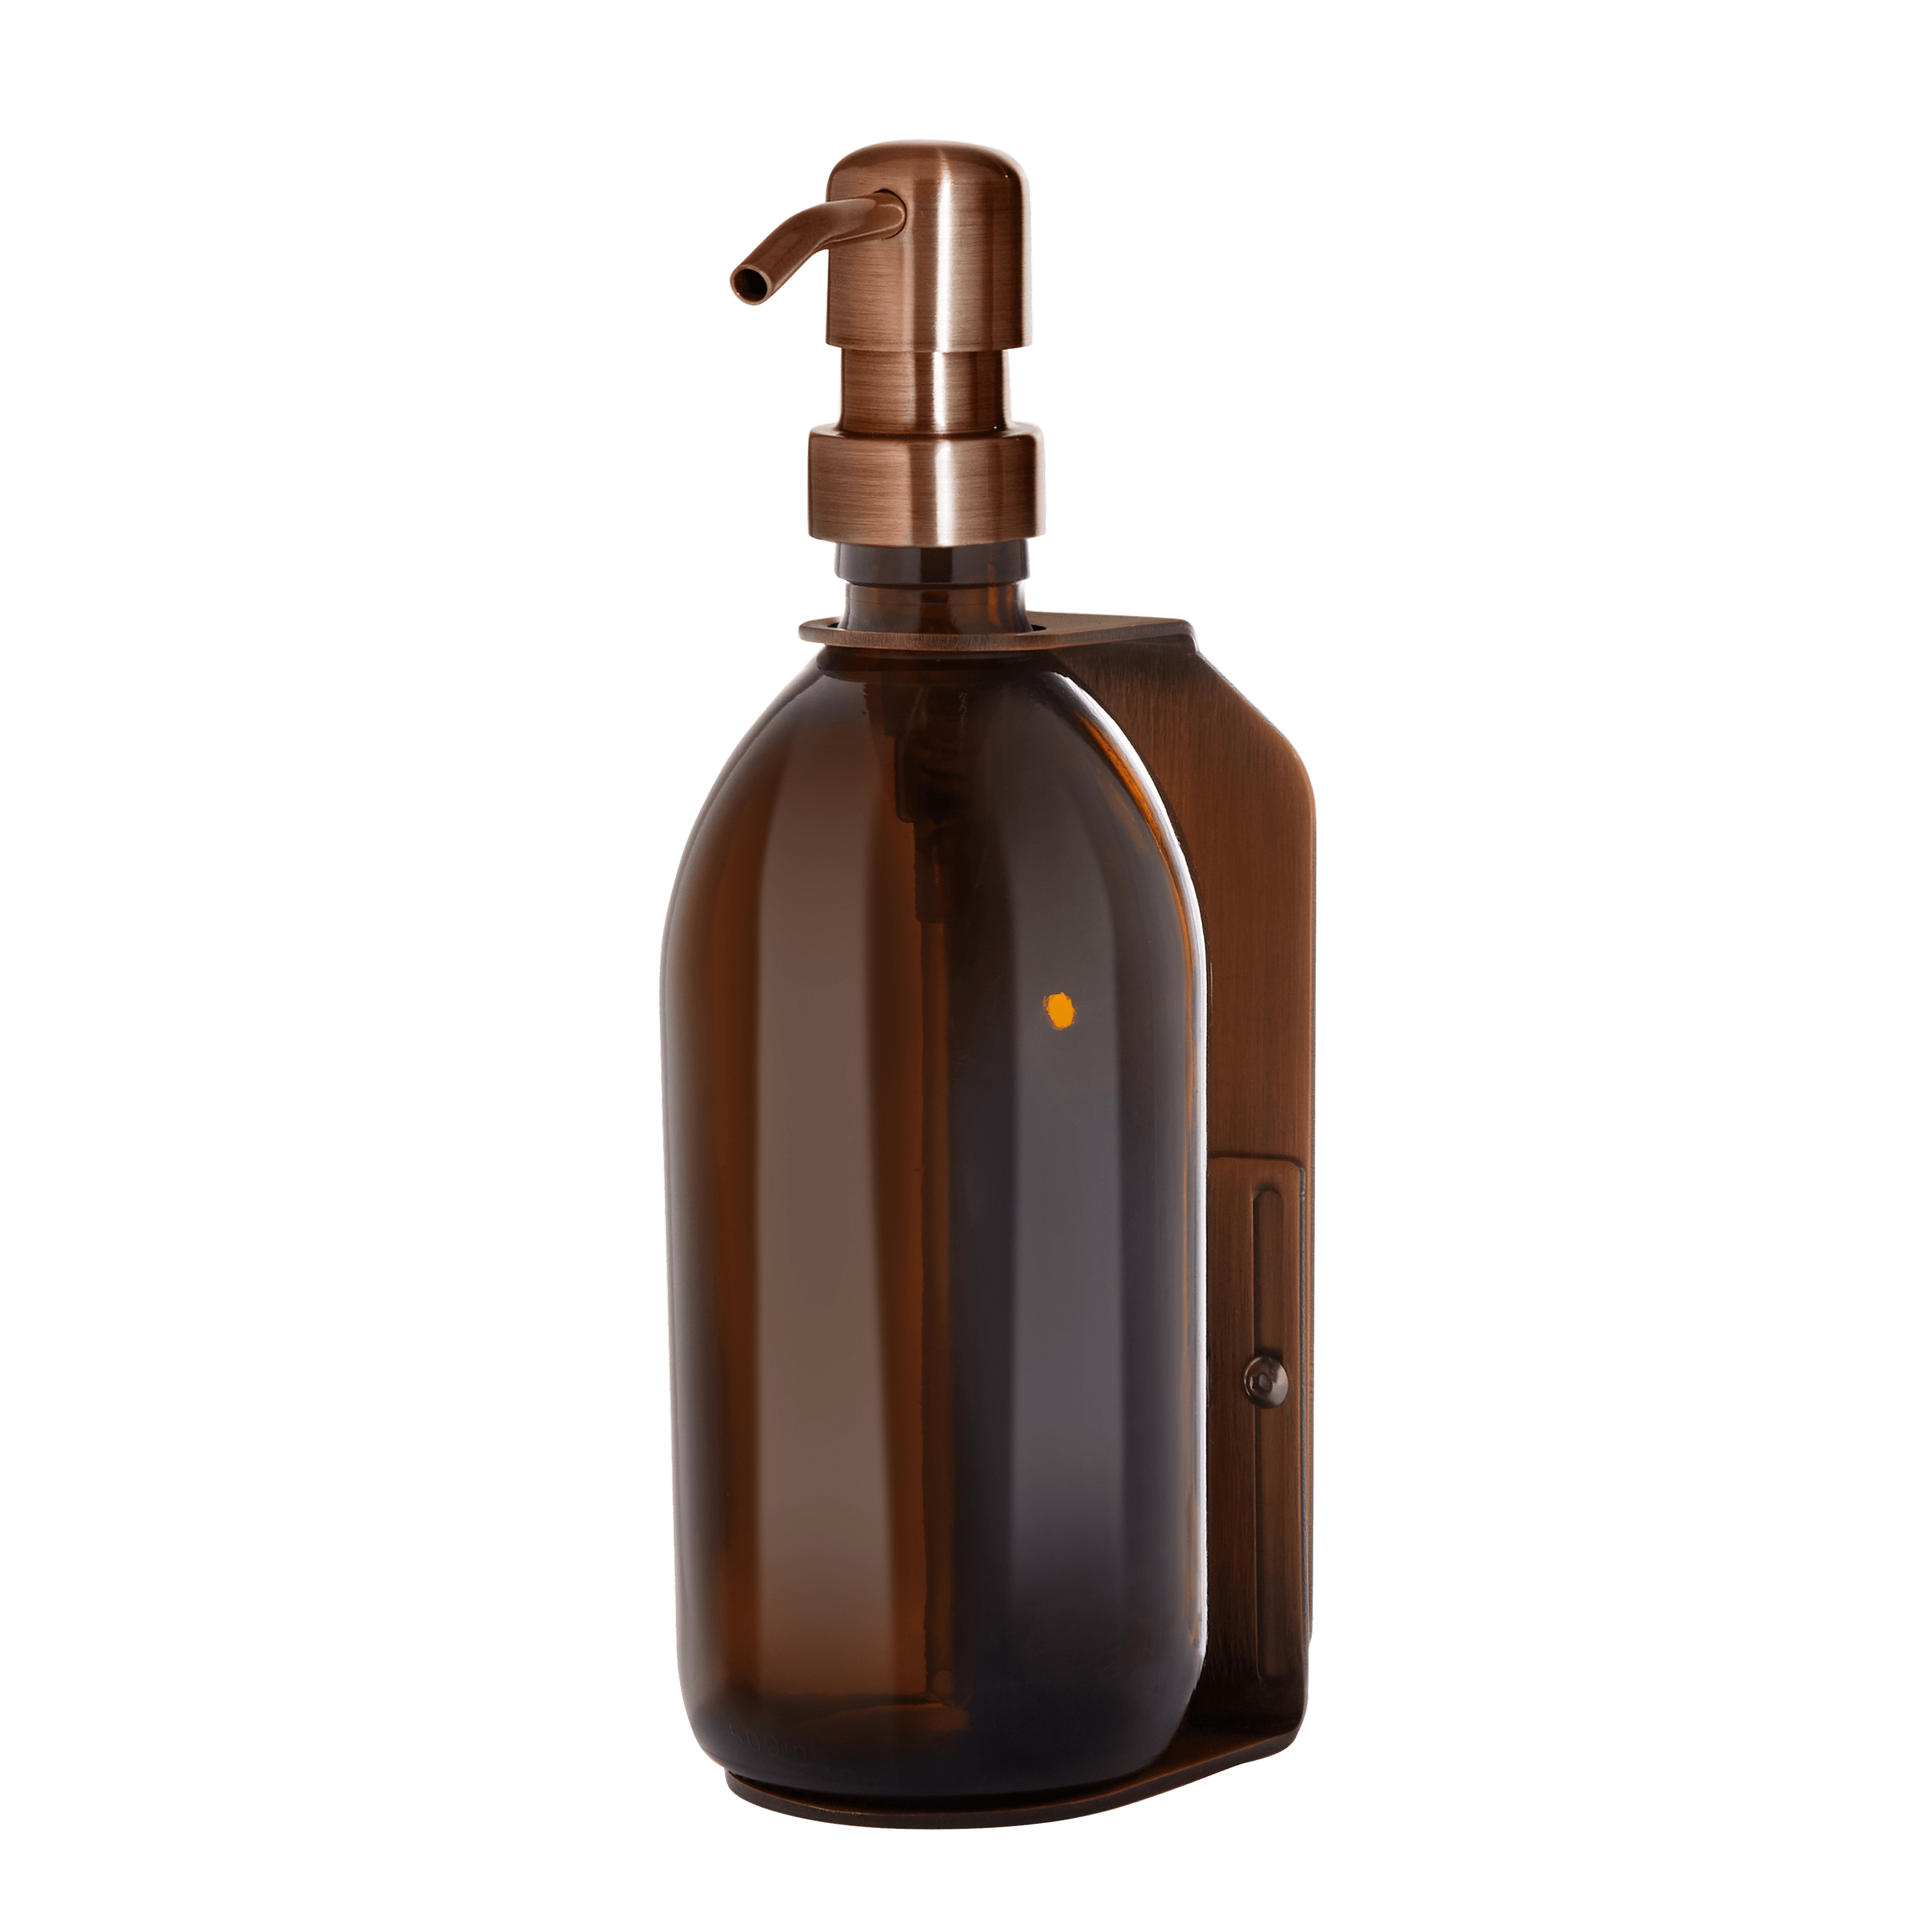 Copper Wall Mounted Soap Dispenser